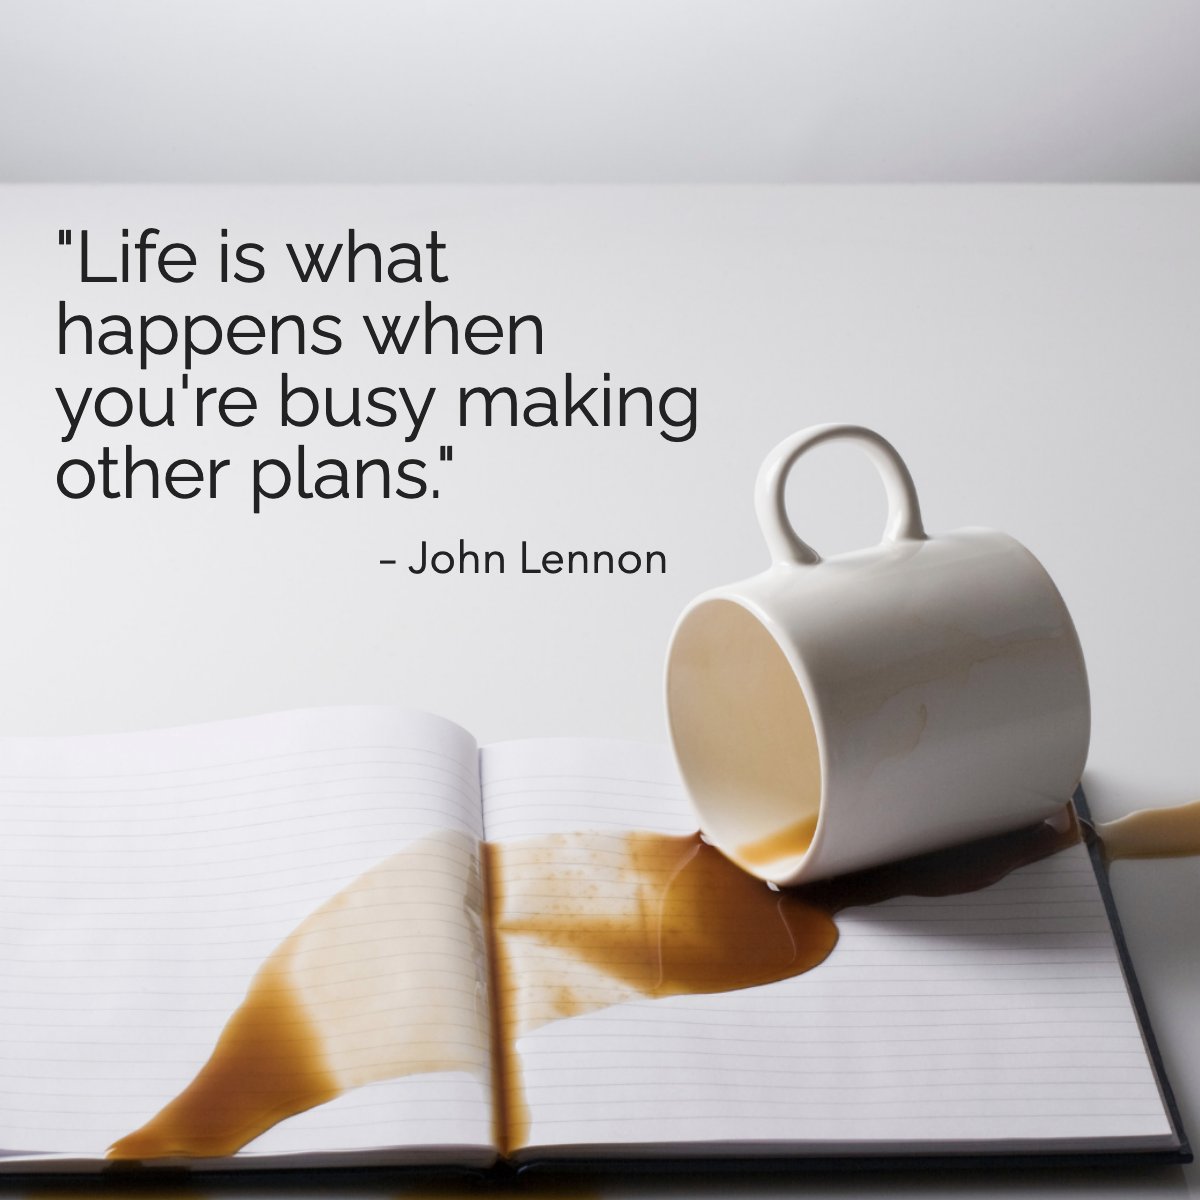 Did you know this famous quote is from John Lennon? Share with us your favorite quote! 🙏 #inspiring #plans #quote #johnlennon #life #RacingRealEstateAgent #BarrettRealEstate #StoneTreeRealEstateTeam #maricopaazrealestate #racingagent #arizonarealestate